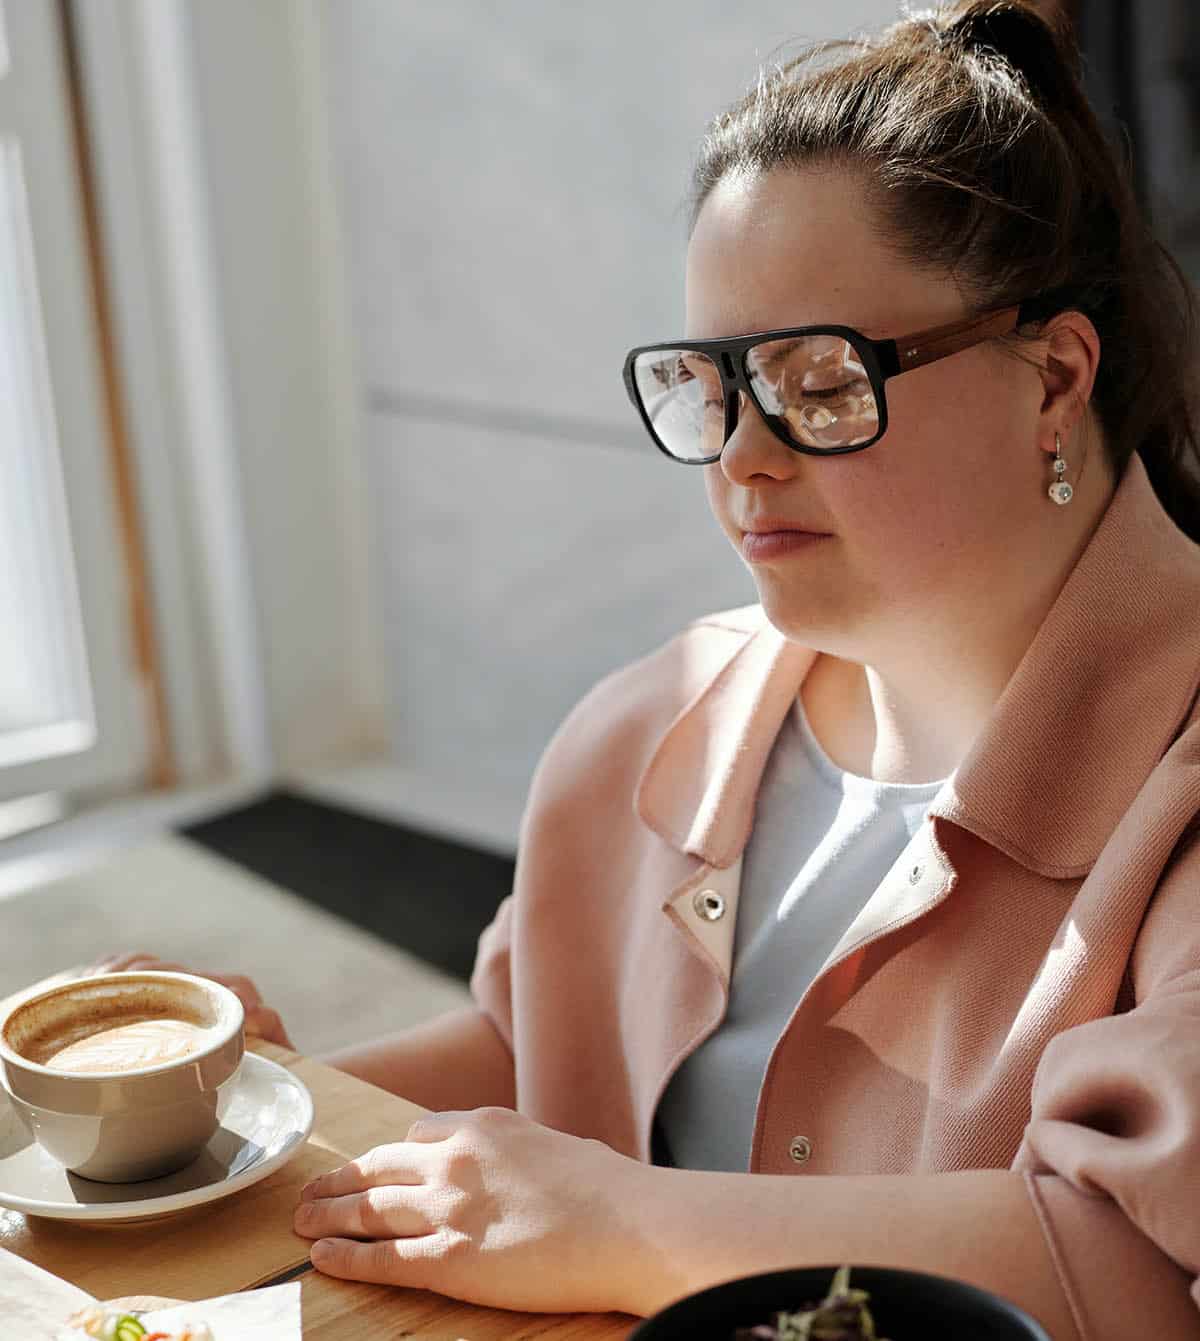 woman with down syndrome wearing glasses with a latte in front of her on a table.